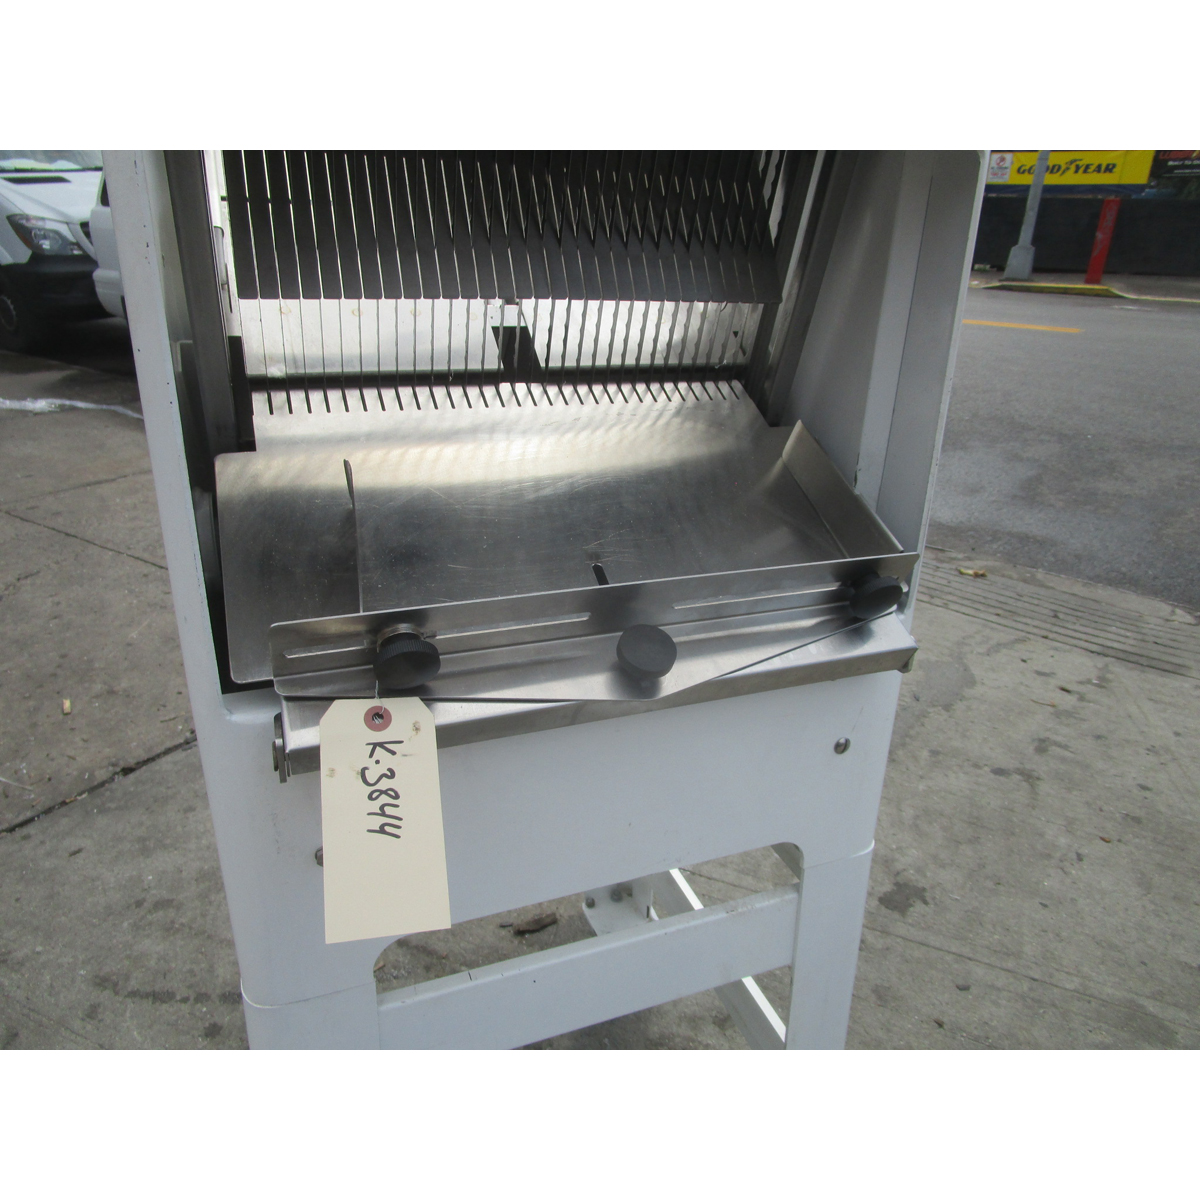 Oliver Gravity Feed Bread Slicer 797-32NC 1/2" Cut, Used Great Condition image 5